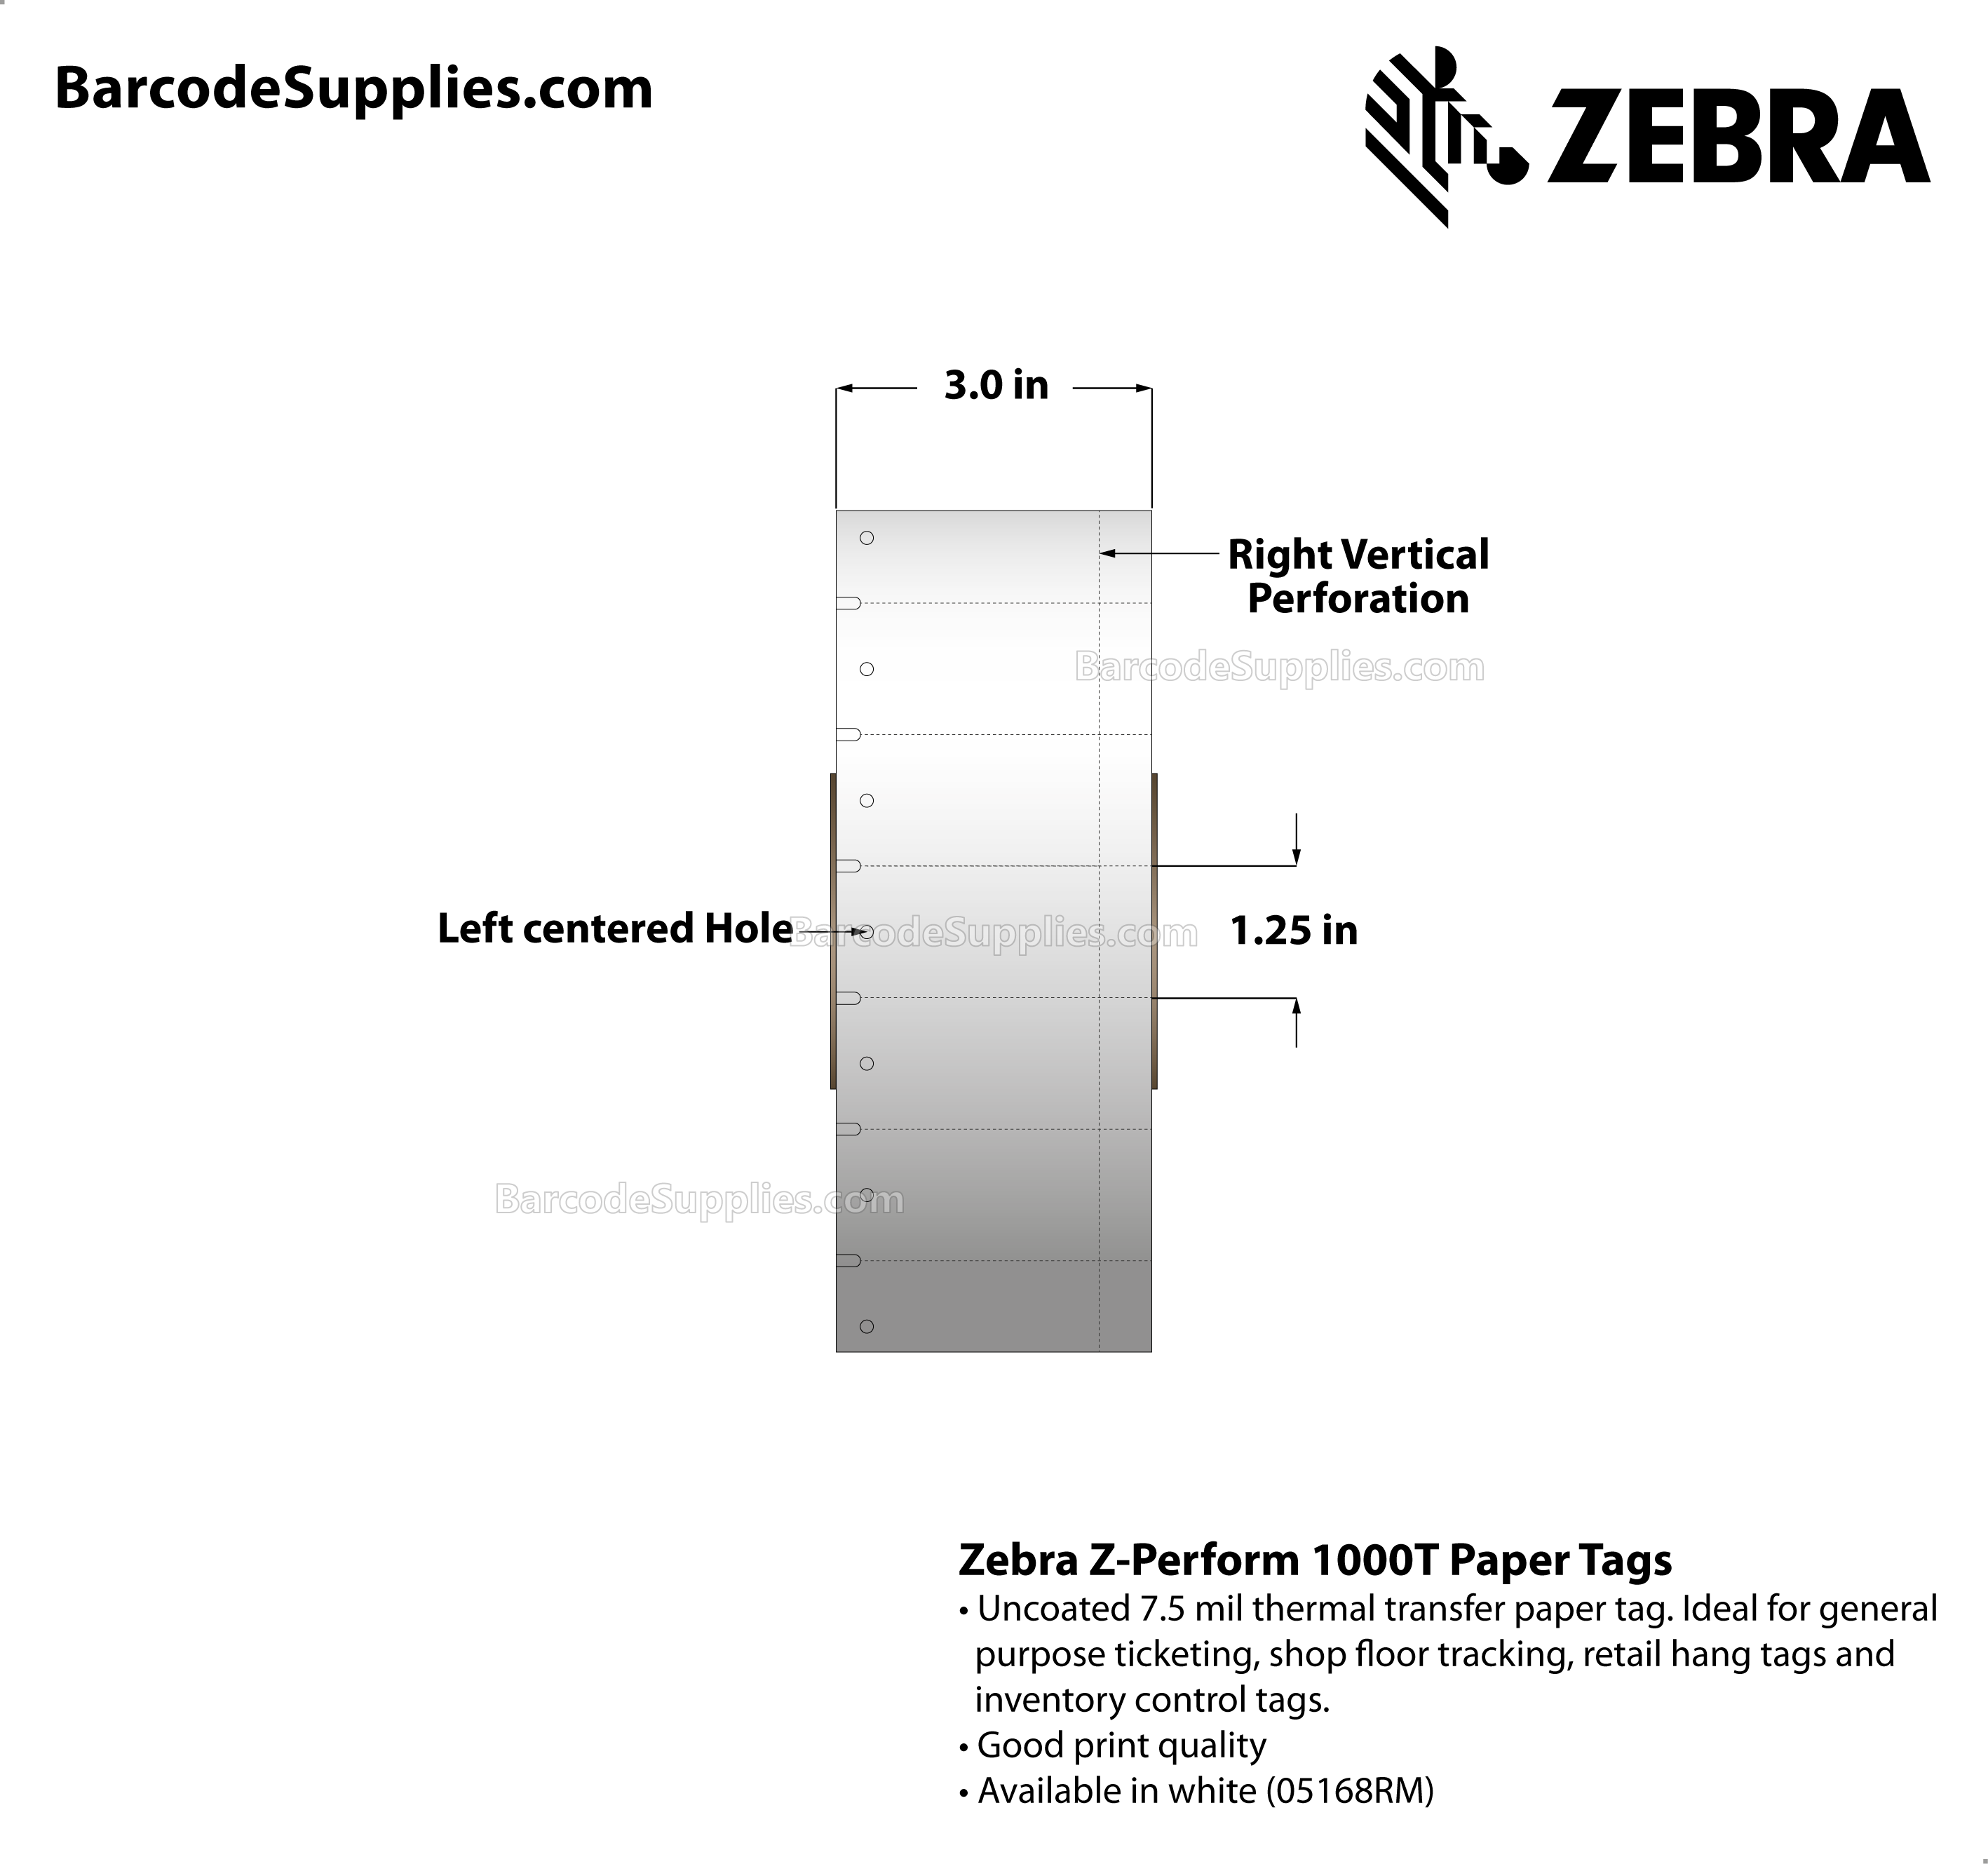 3 x 1.25 Thermal Transfer White Z-Perform 1000T 7.5 mil Tag Tags With No Adhesive - Contains side sensing notch - left-centered hole and right vertical perforation. - Perforated - 3750 Tags Per Roll - Carton Of 6 Rolls - 22500 Tags Total - MPN: 67251